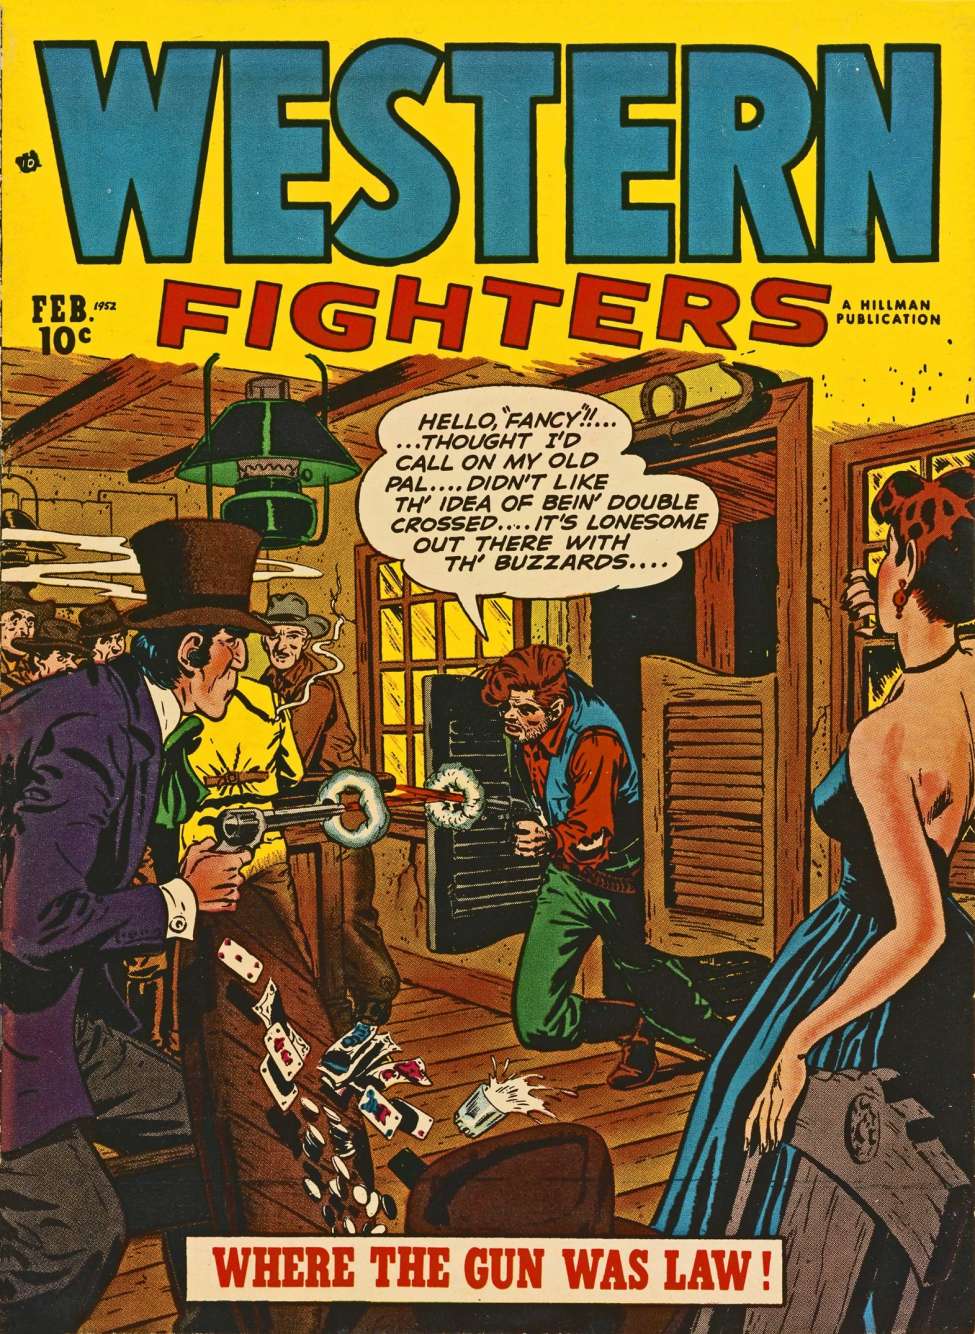 Book Cover For Western Fighters v4 3 - Version 2